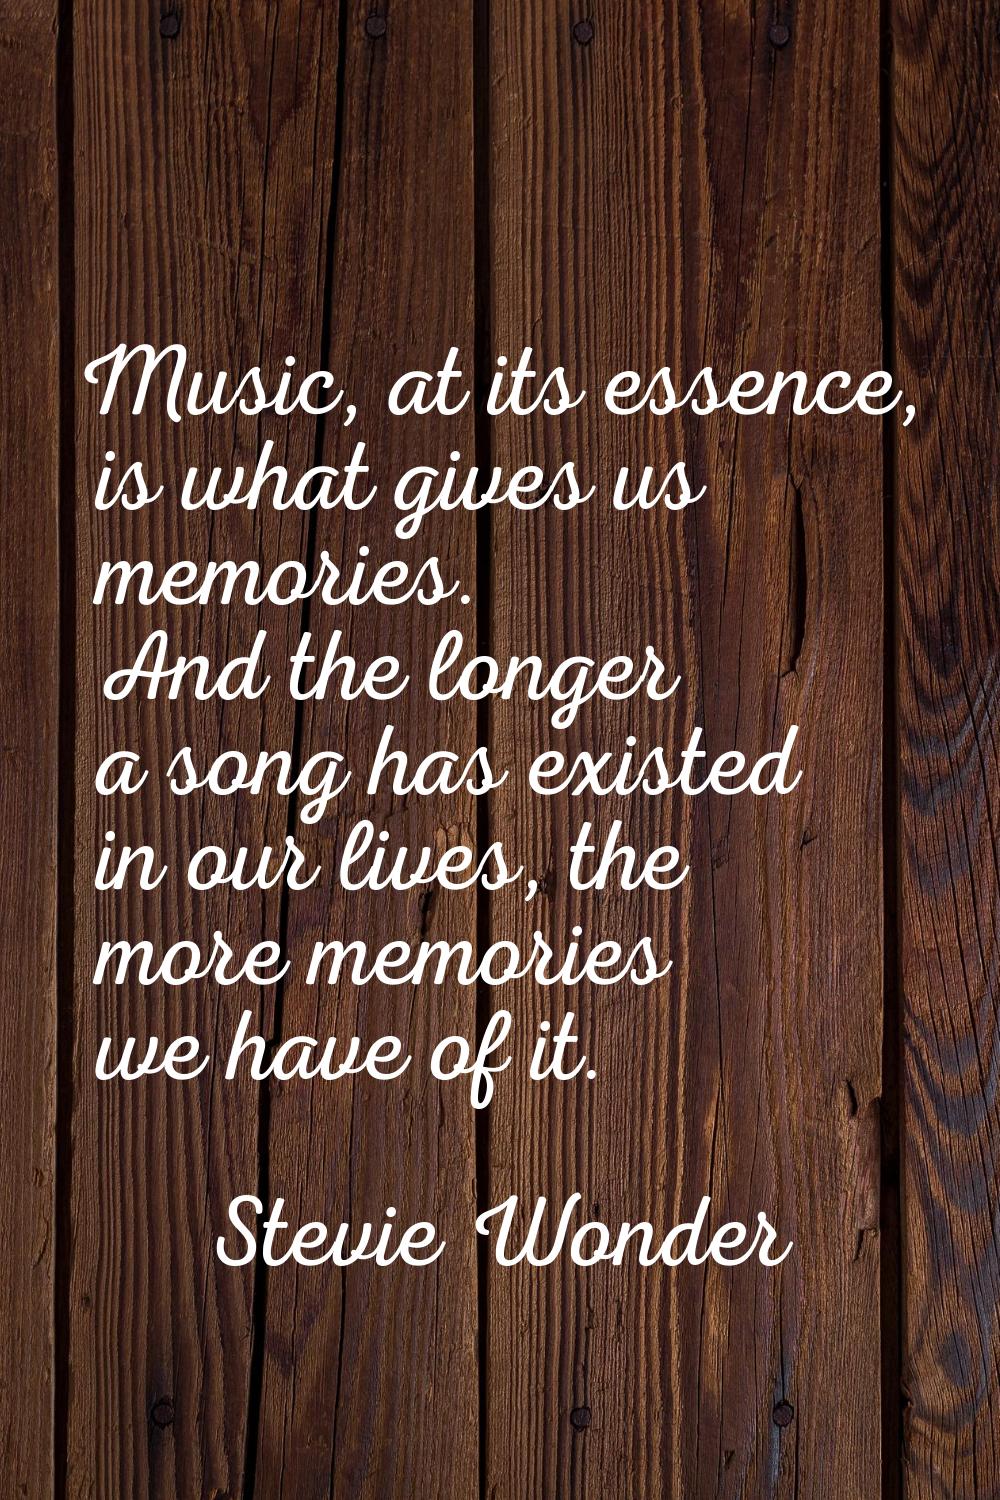 Music, at its essence, is what gives us memories. And the longer a song has existed in our lives, t